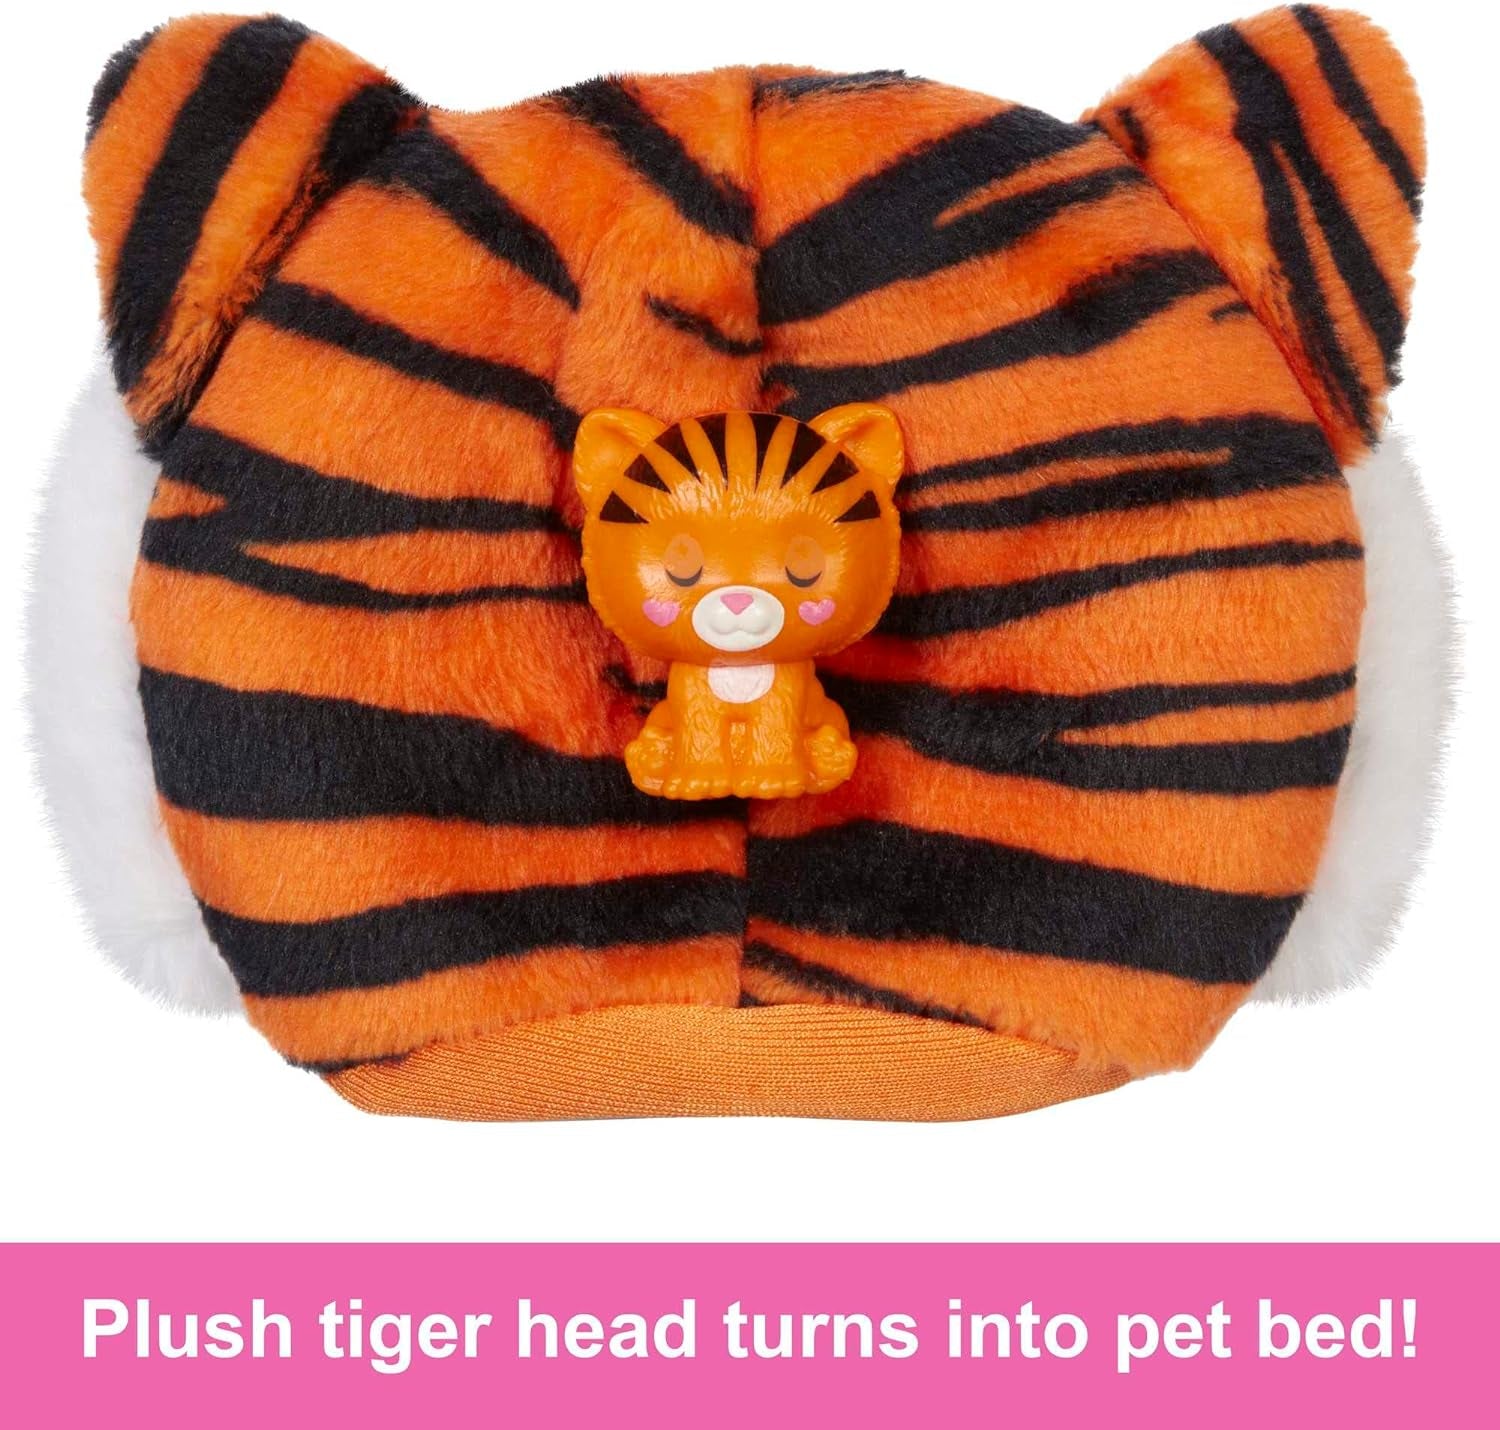 Dolls and Accessories, Cutie Reveal Doll with Tiger Plush Costume & 10 Surprises Including Color Change, Jungle Series, HKP99